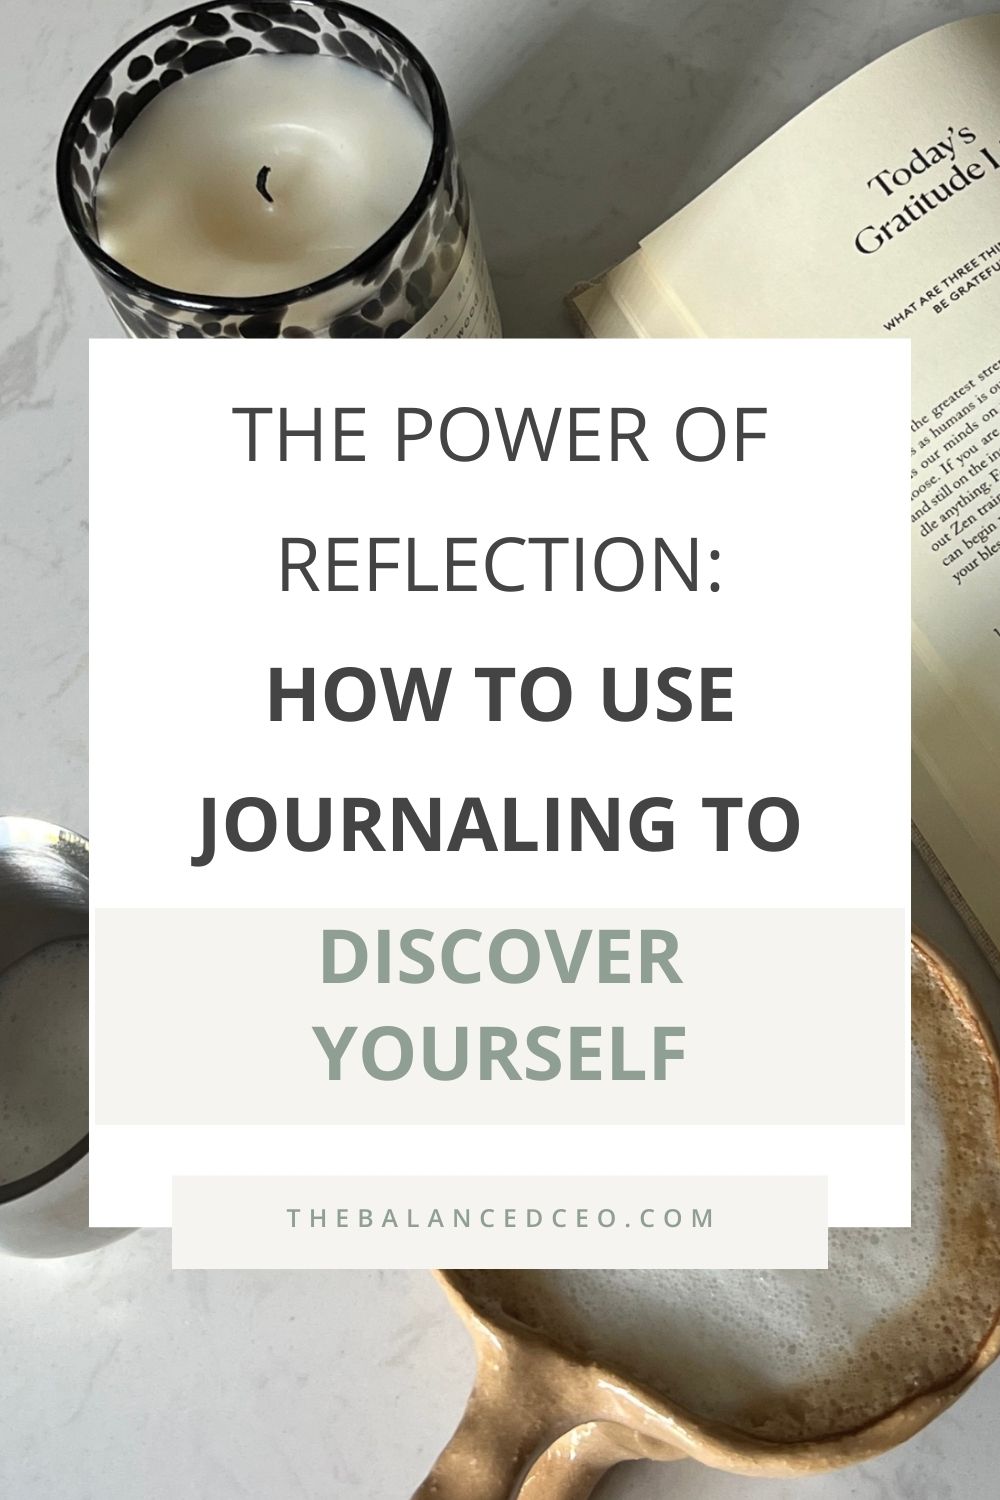 The Power of Reflection: How to Use Journaling to Discover Yourself